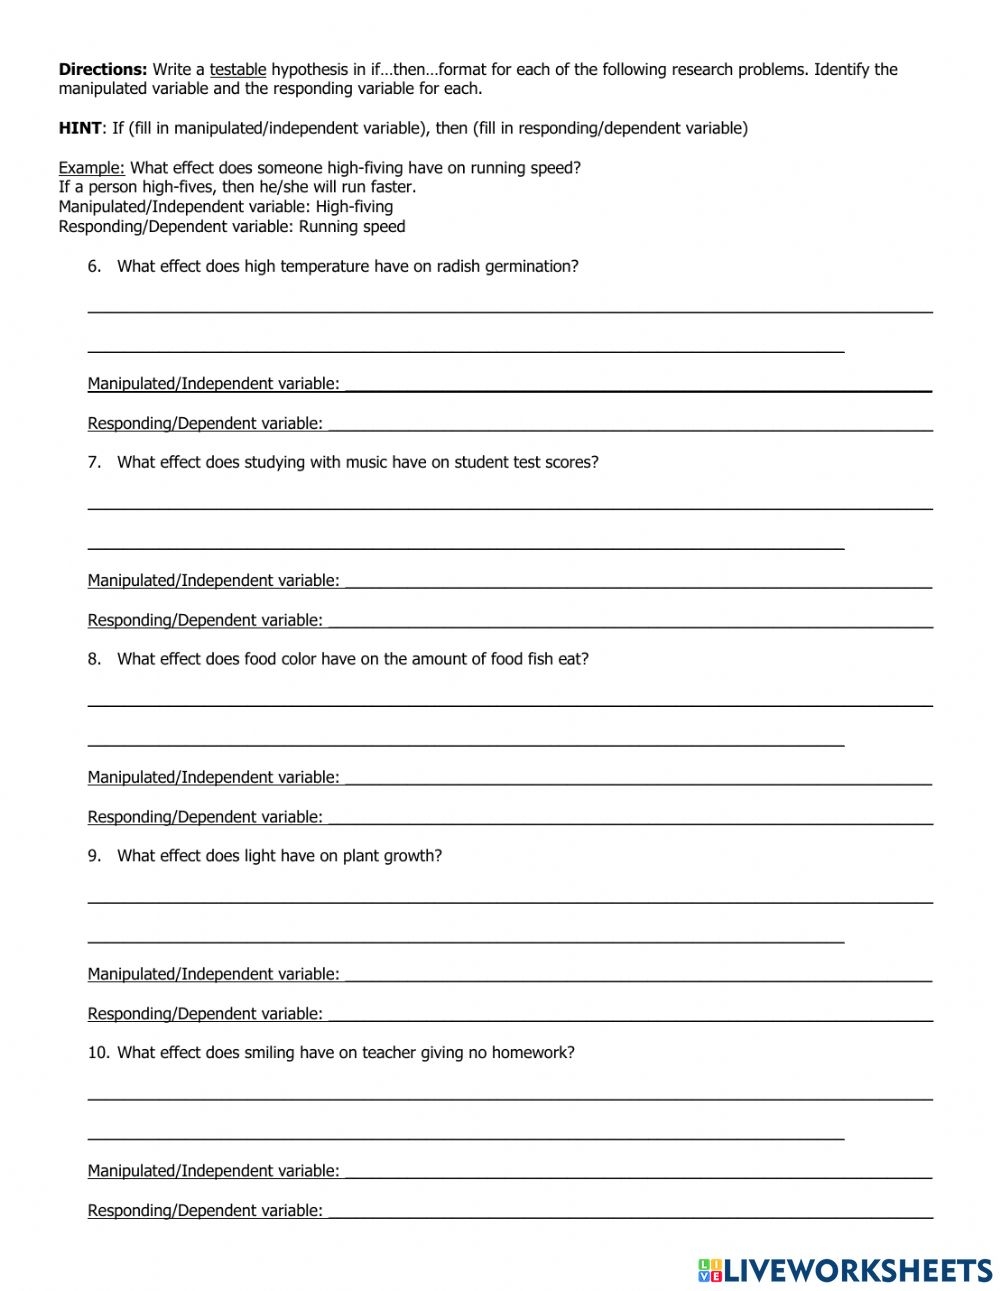 hypothesis-writing-practice-worksheet-with-answers-pdf-printable